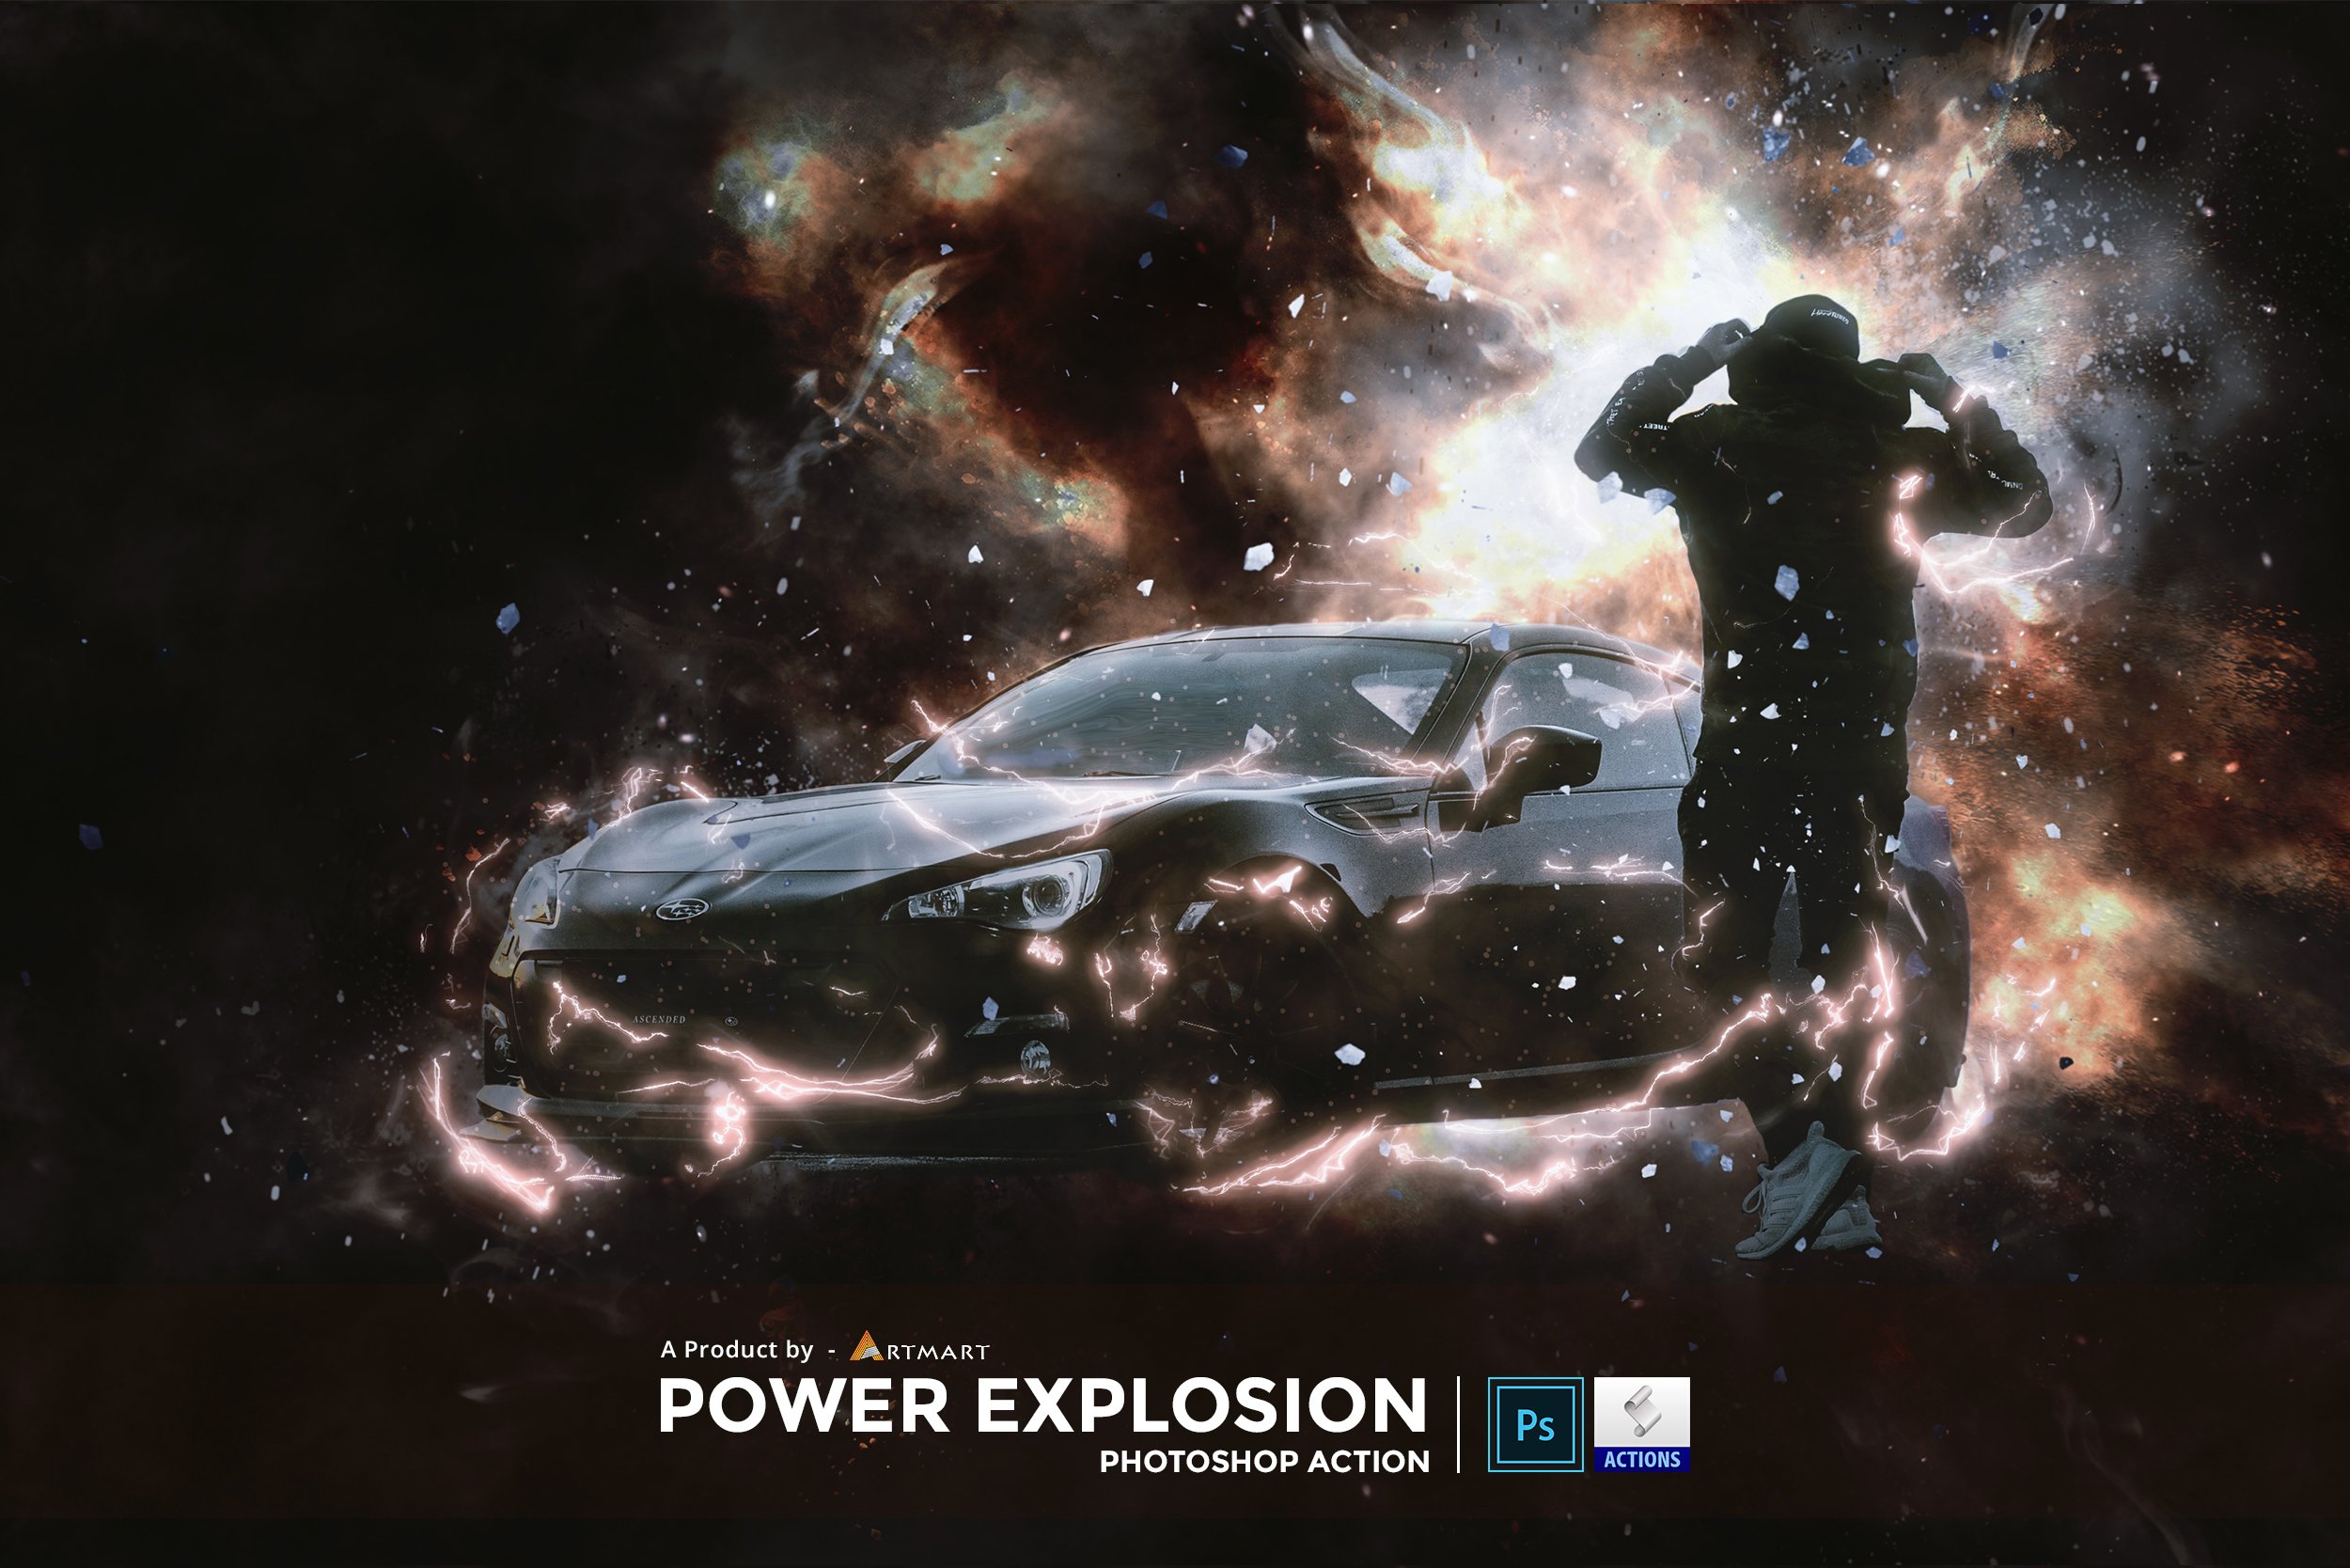 Power Explosion Photoshop Actioncover image.